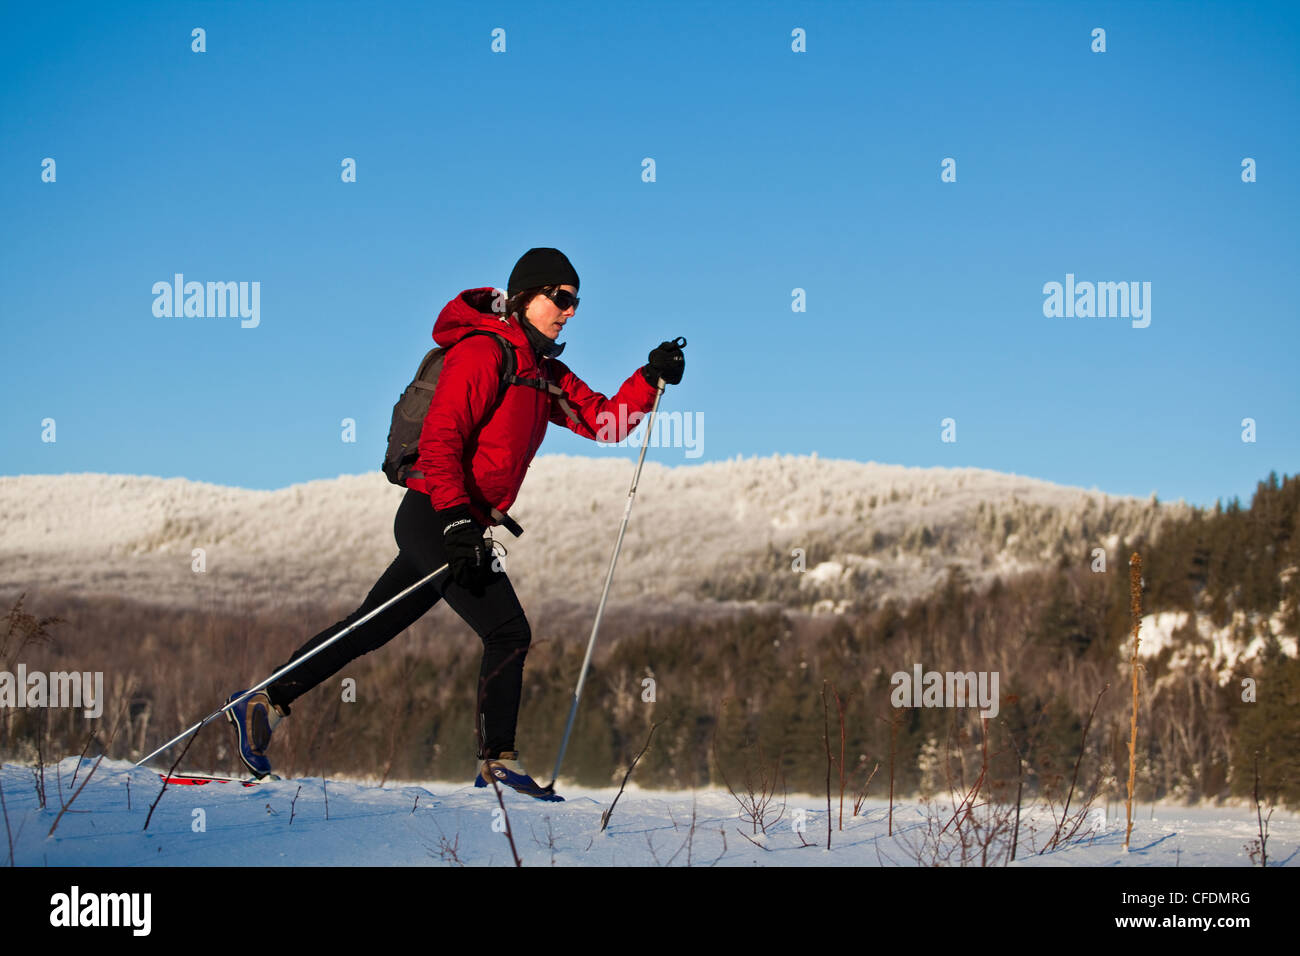 A woman crosscountry skiing at Mt Orford, Quebec, Canada Stock Photo